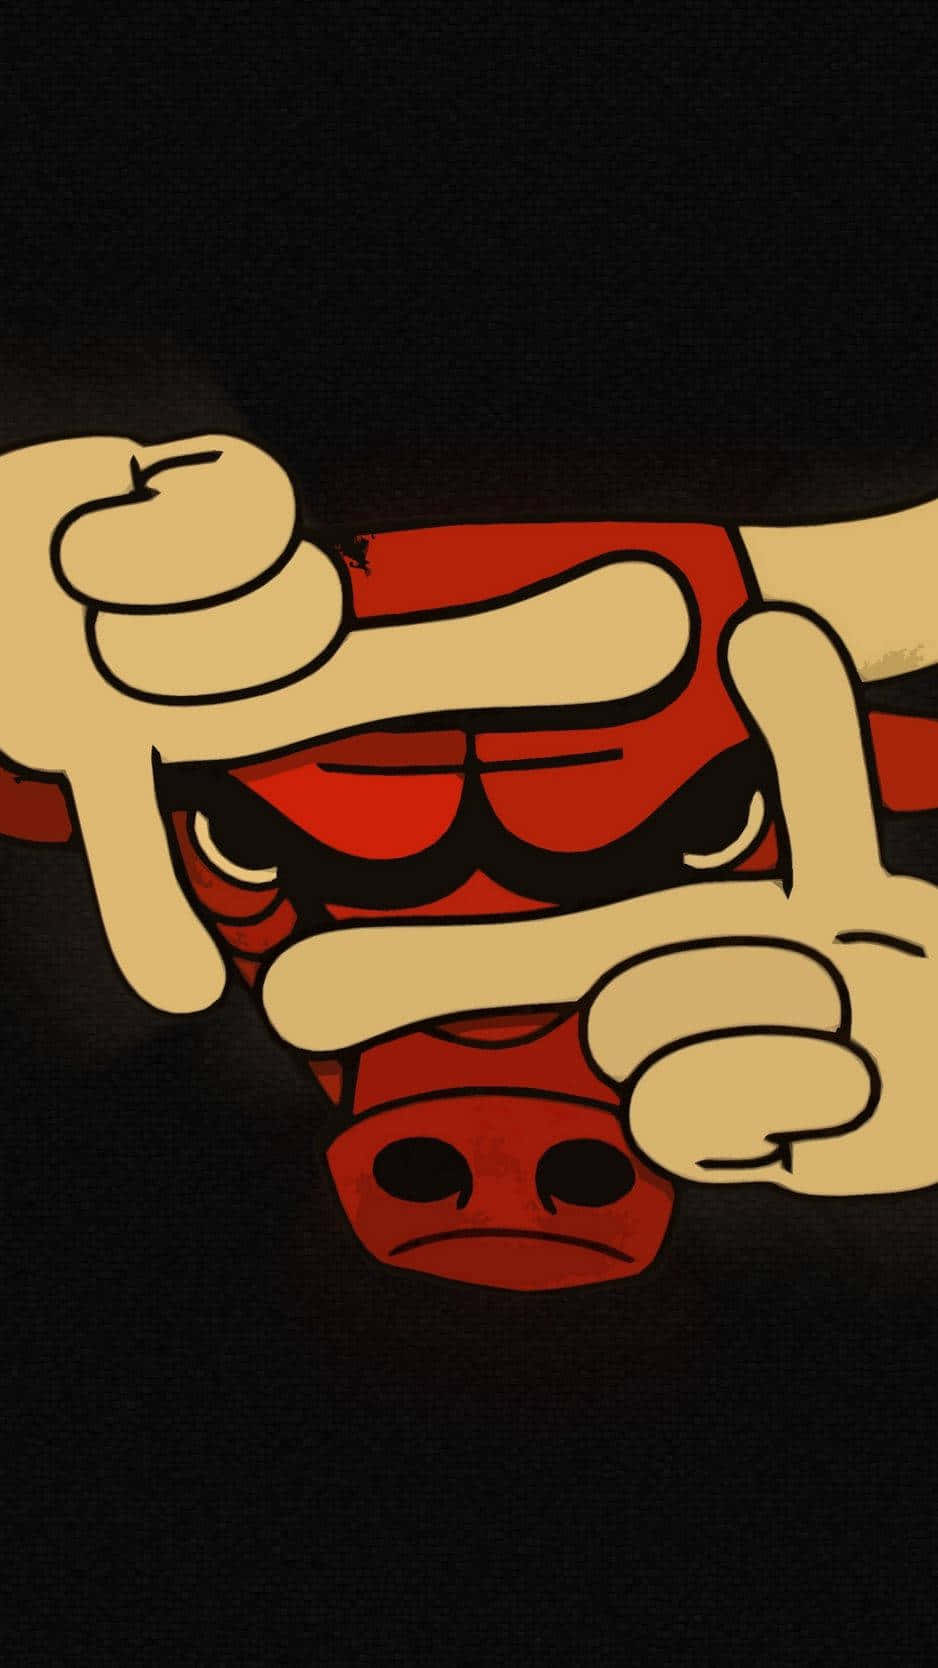 Support Your Team with a Chicago Bulls Themed Iphone Wallpaper